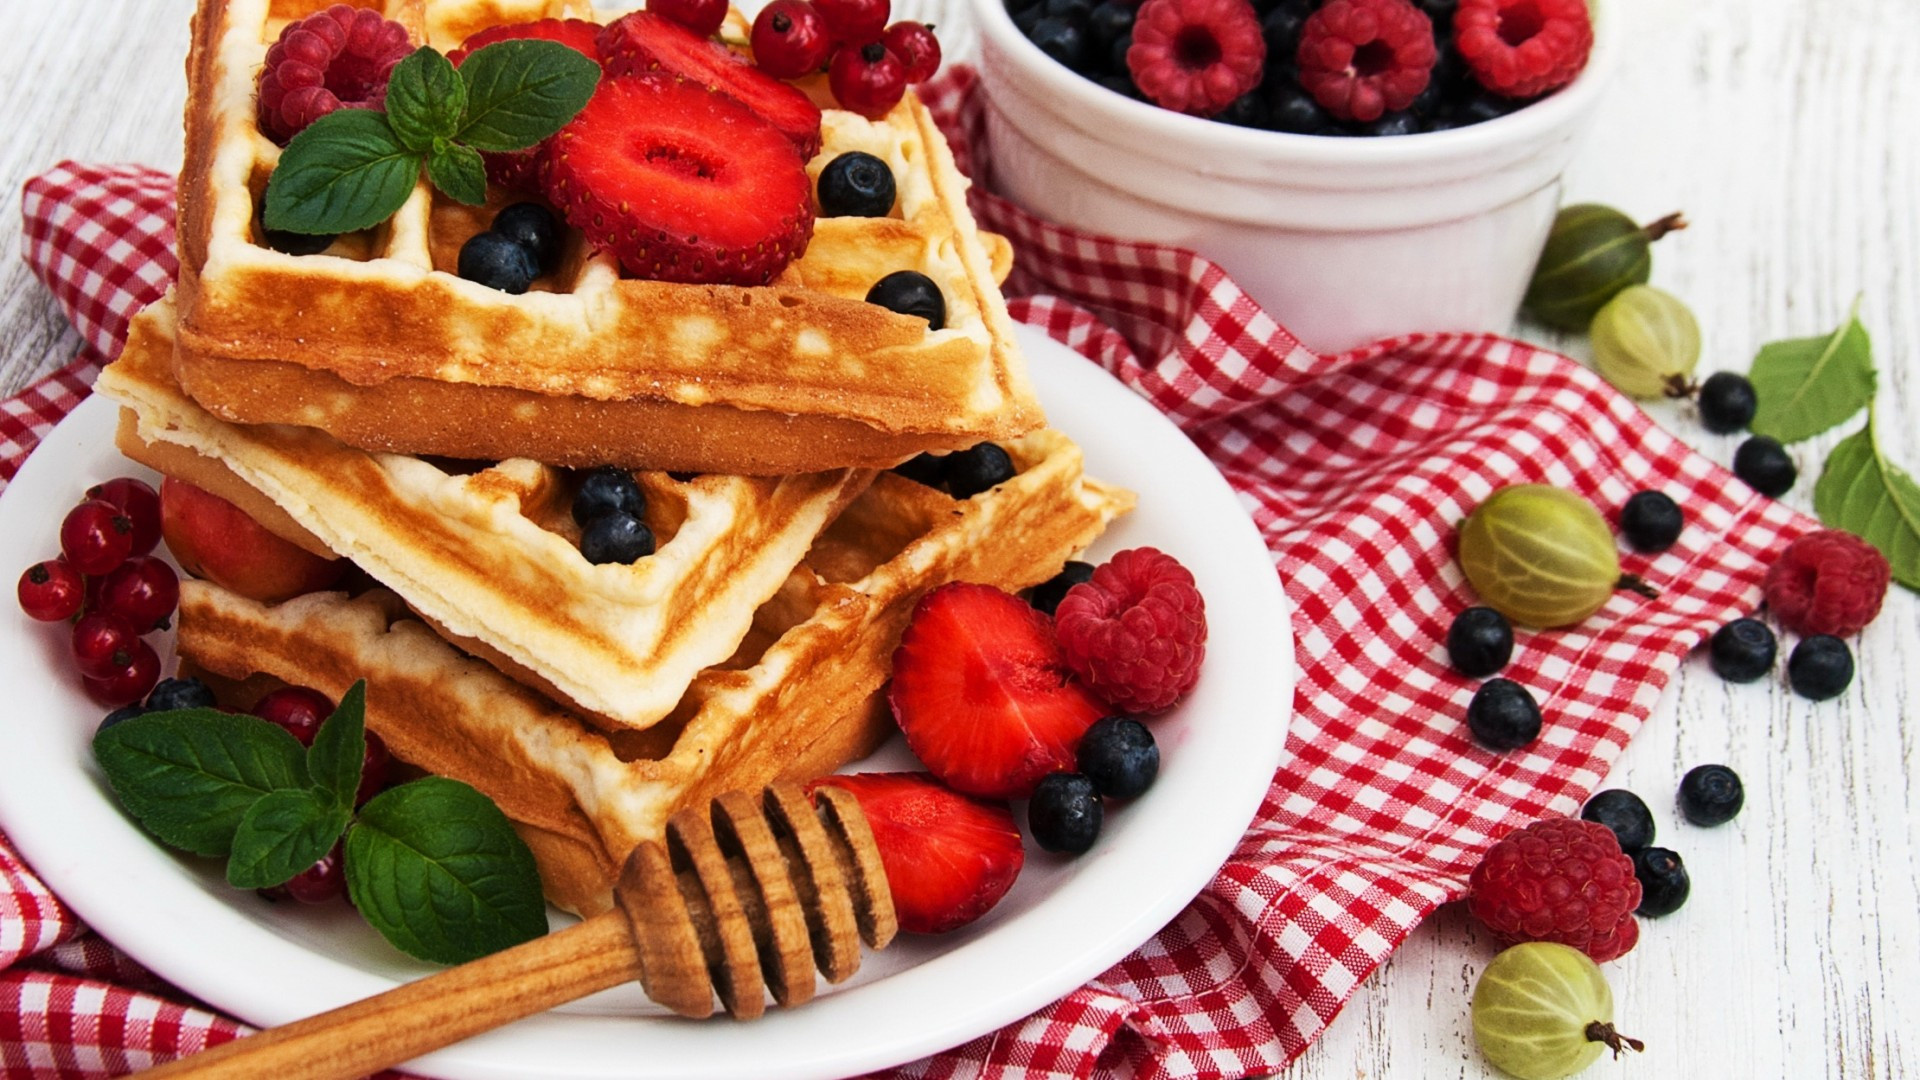 Waffle: Cooked until they become golden-brown in color, with a crispy outer texture and a soft interior. 1920x1080 Full HD Wallpaper.